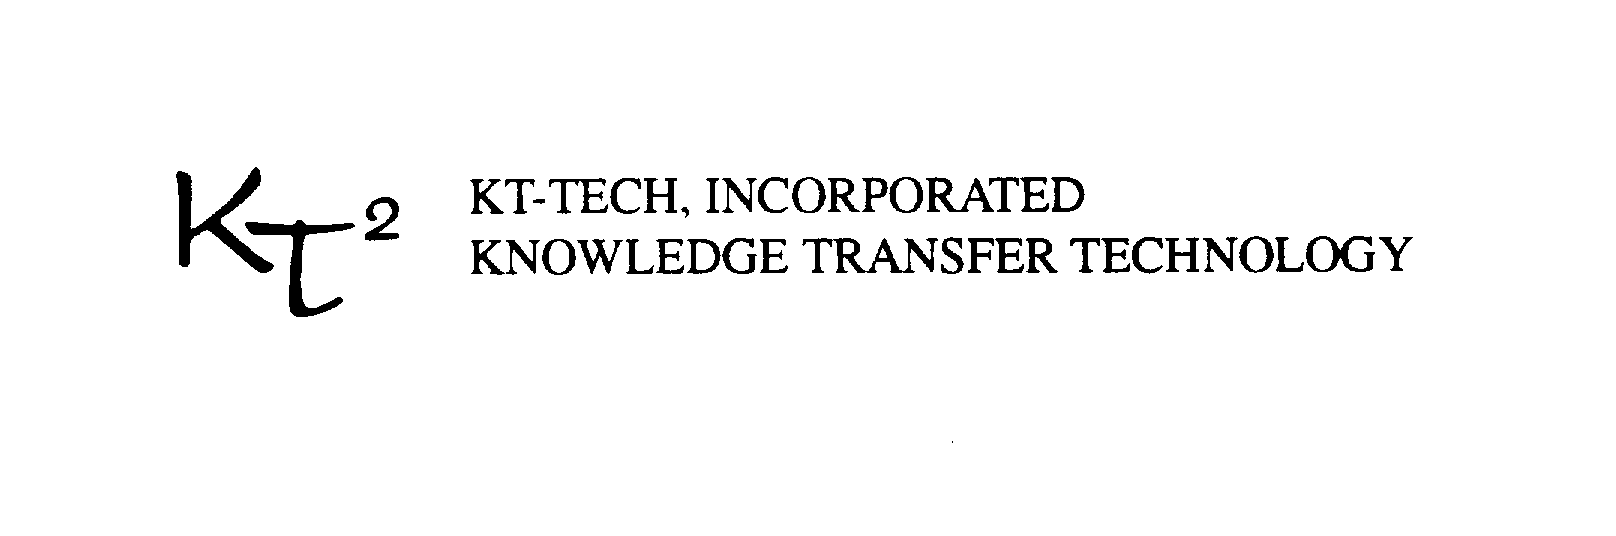  KT2 KT-TECH, INCORPORATED KNOWLEDGE TRANSFER TECHNOLOGY